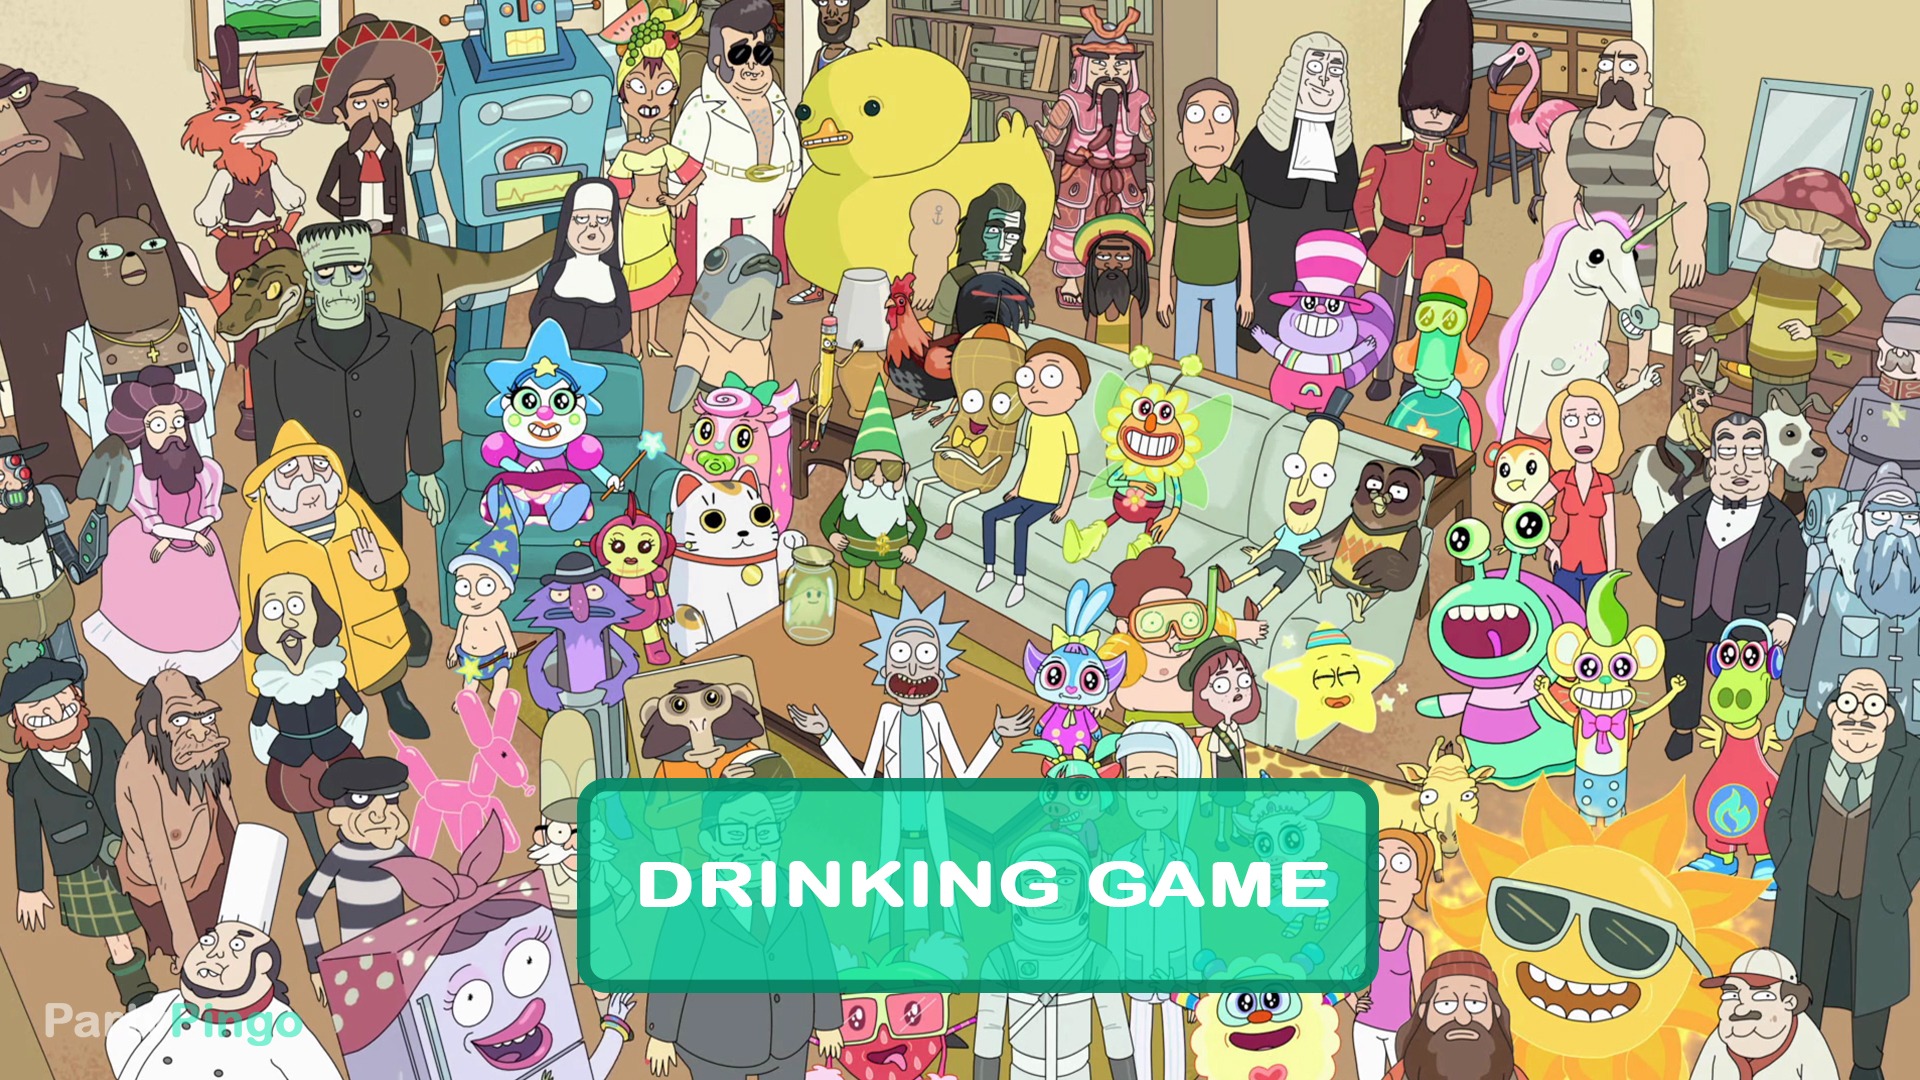 Rick and Morty - Total Rickall Drinking Game